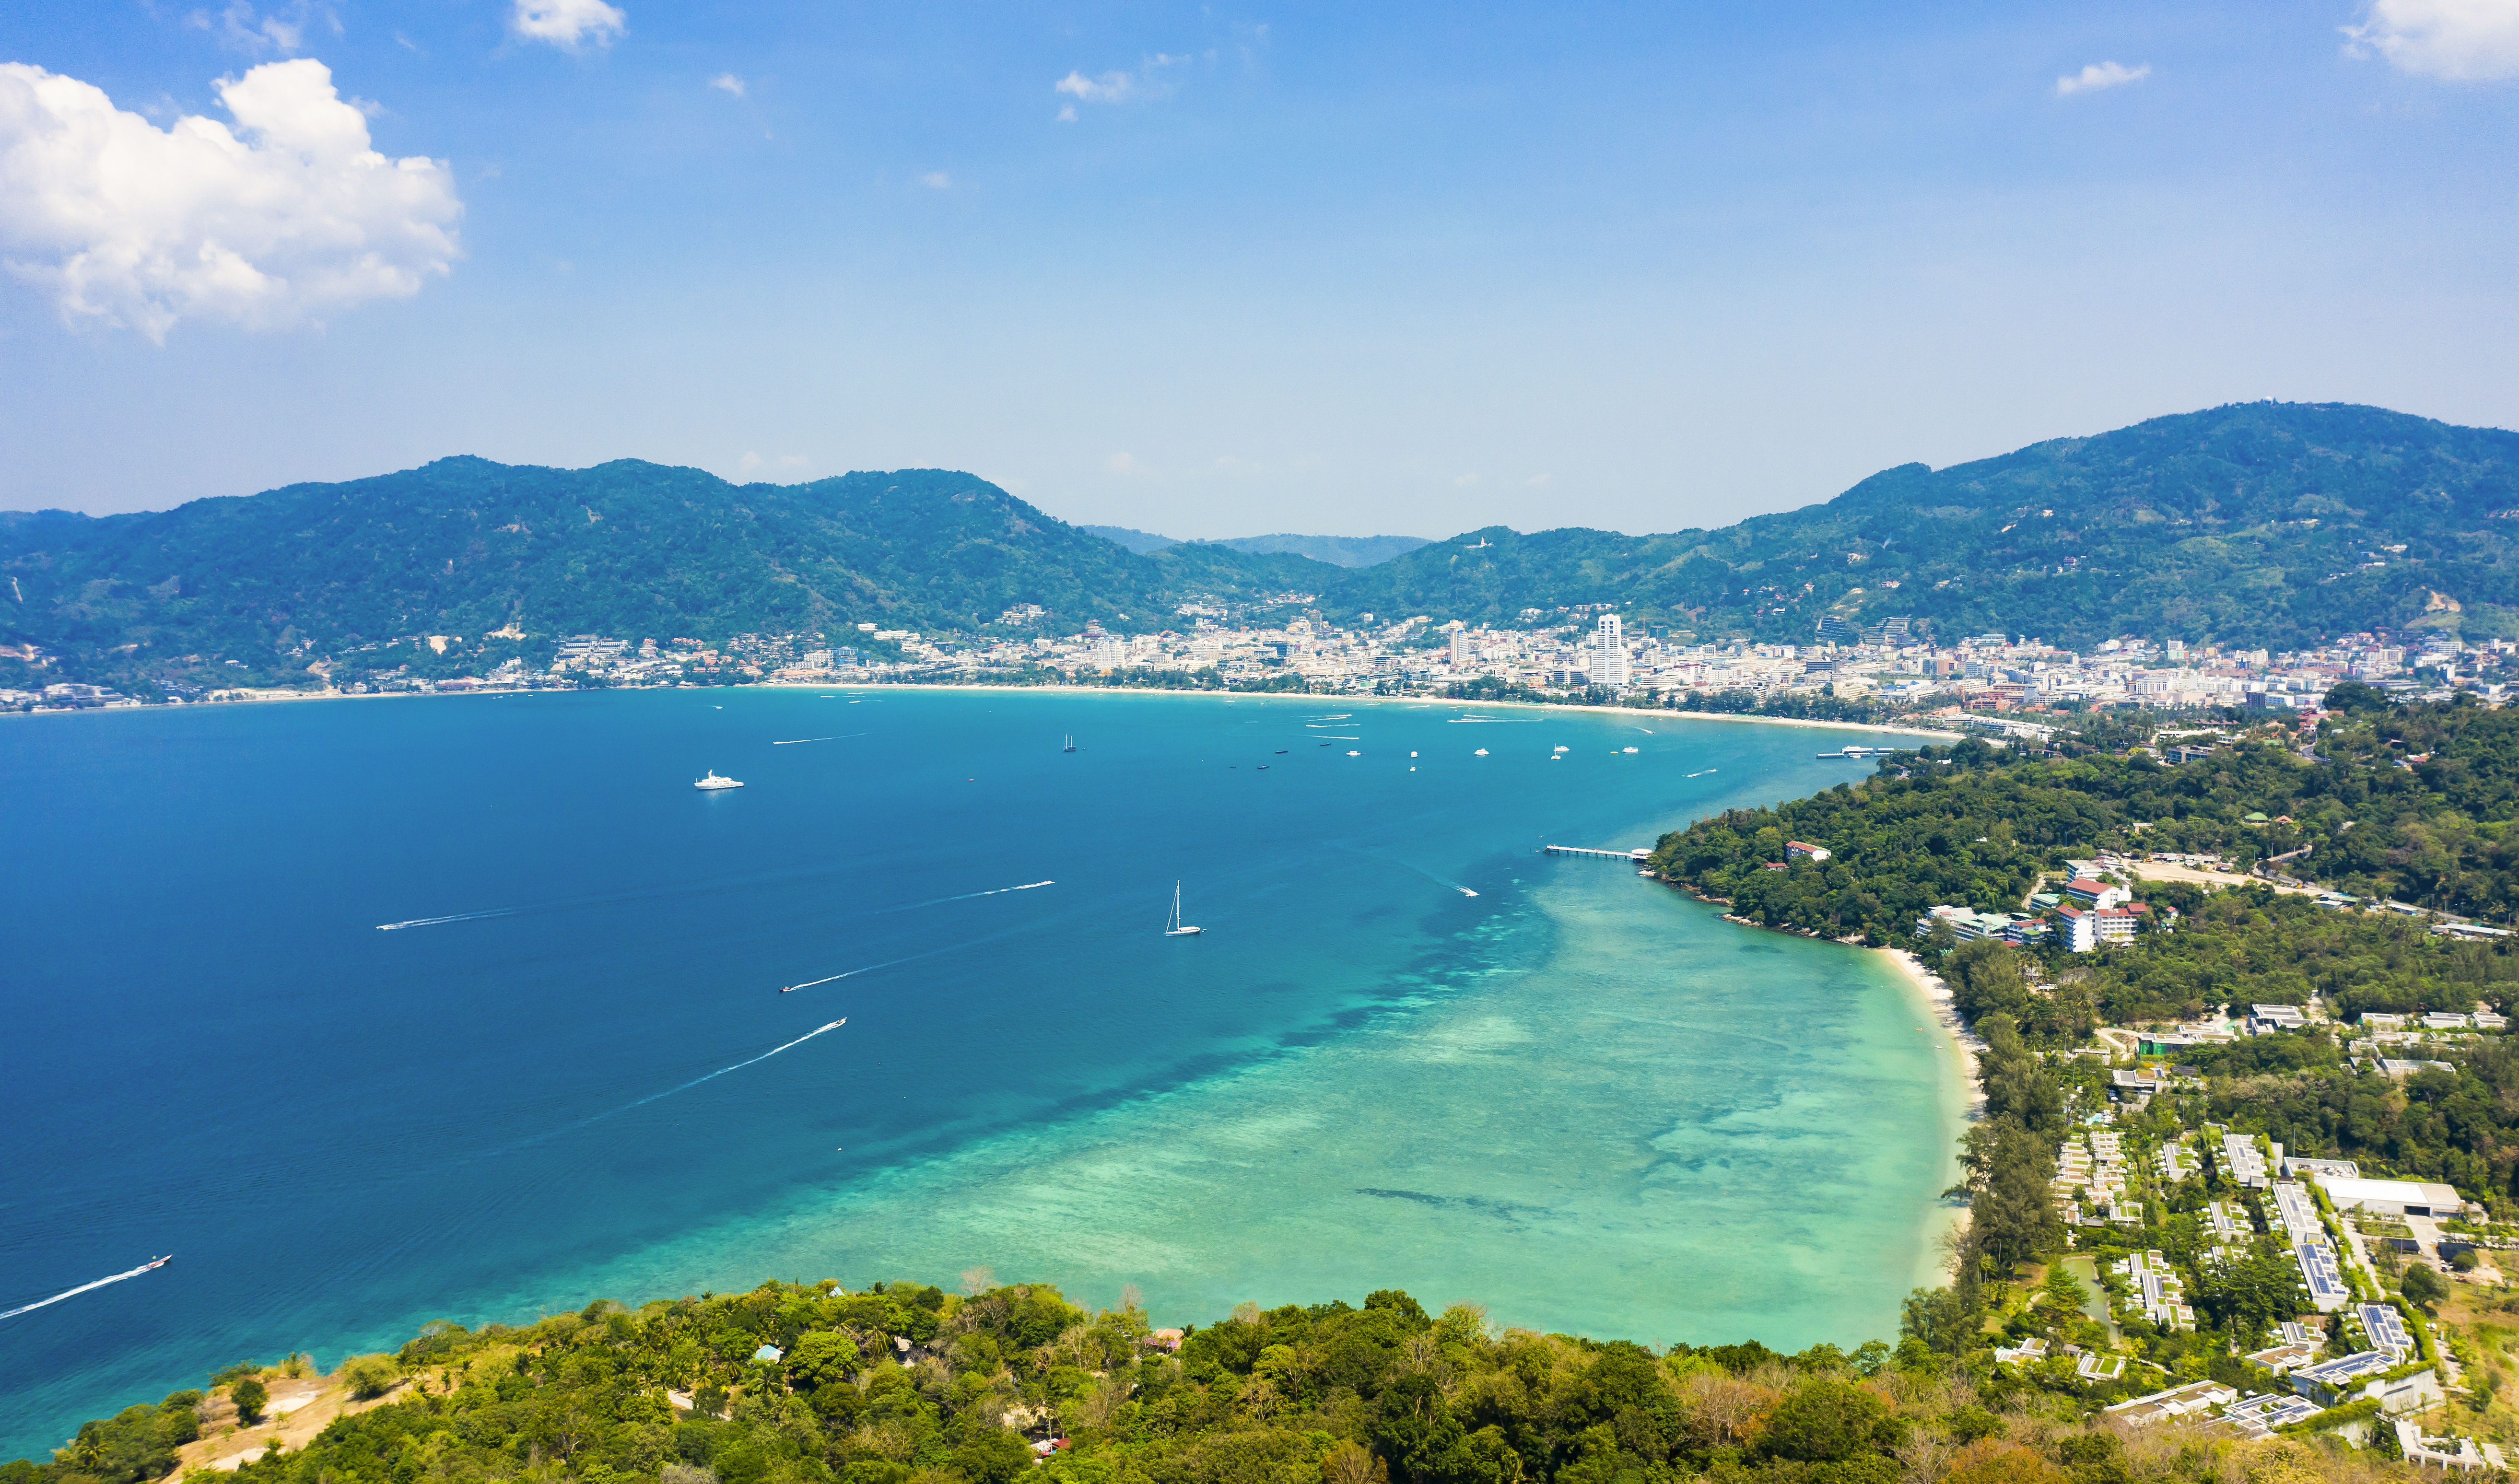 Aerial view of Patong and Tri Trang Beach in Phuket, surrounded by turquoise waters with sail boats, white sand and green hills.